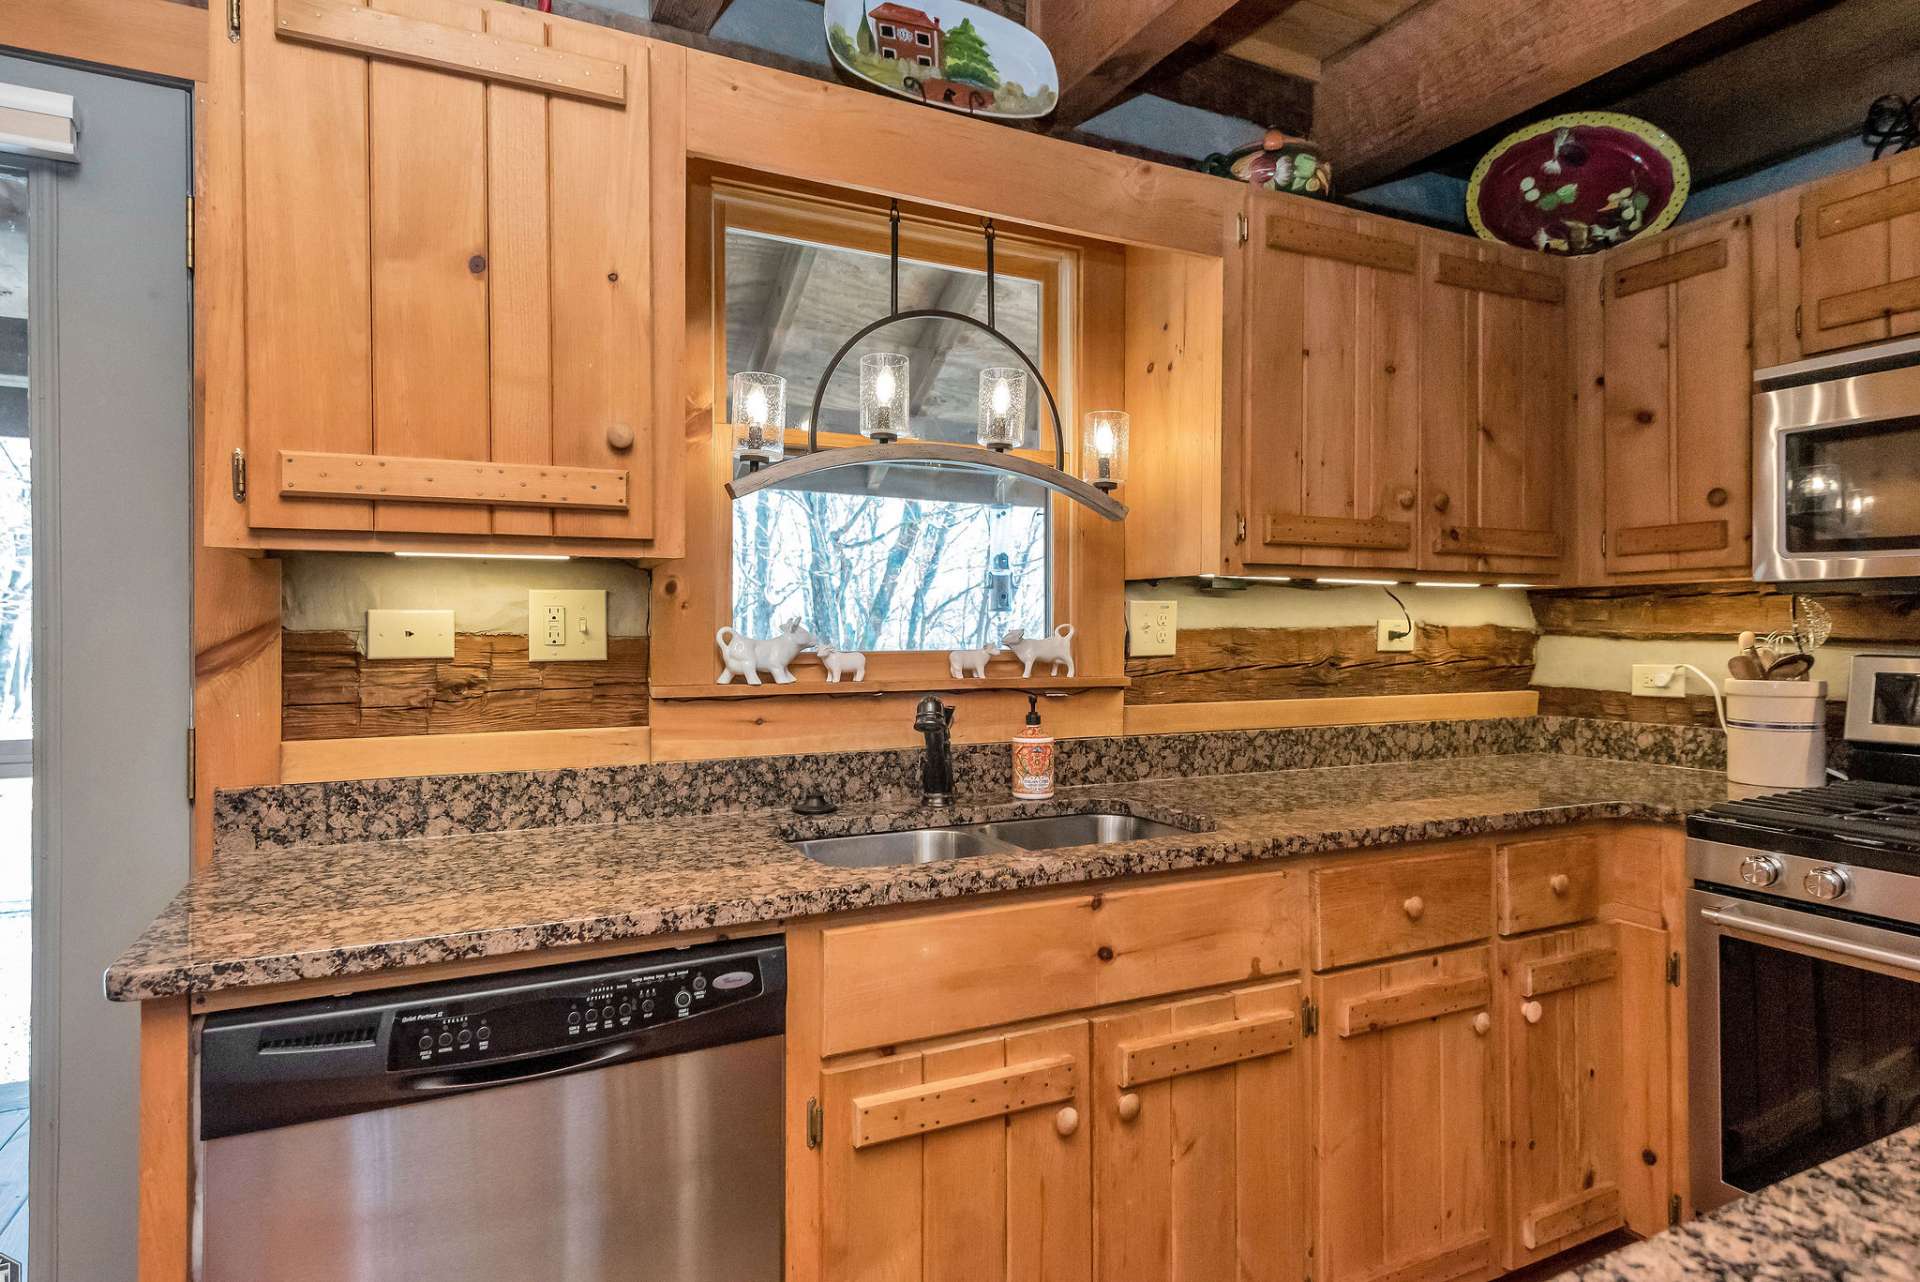 Handcrafted cabinets are a common feature throughout Stonebridge.